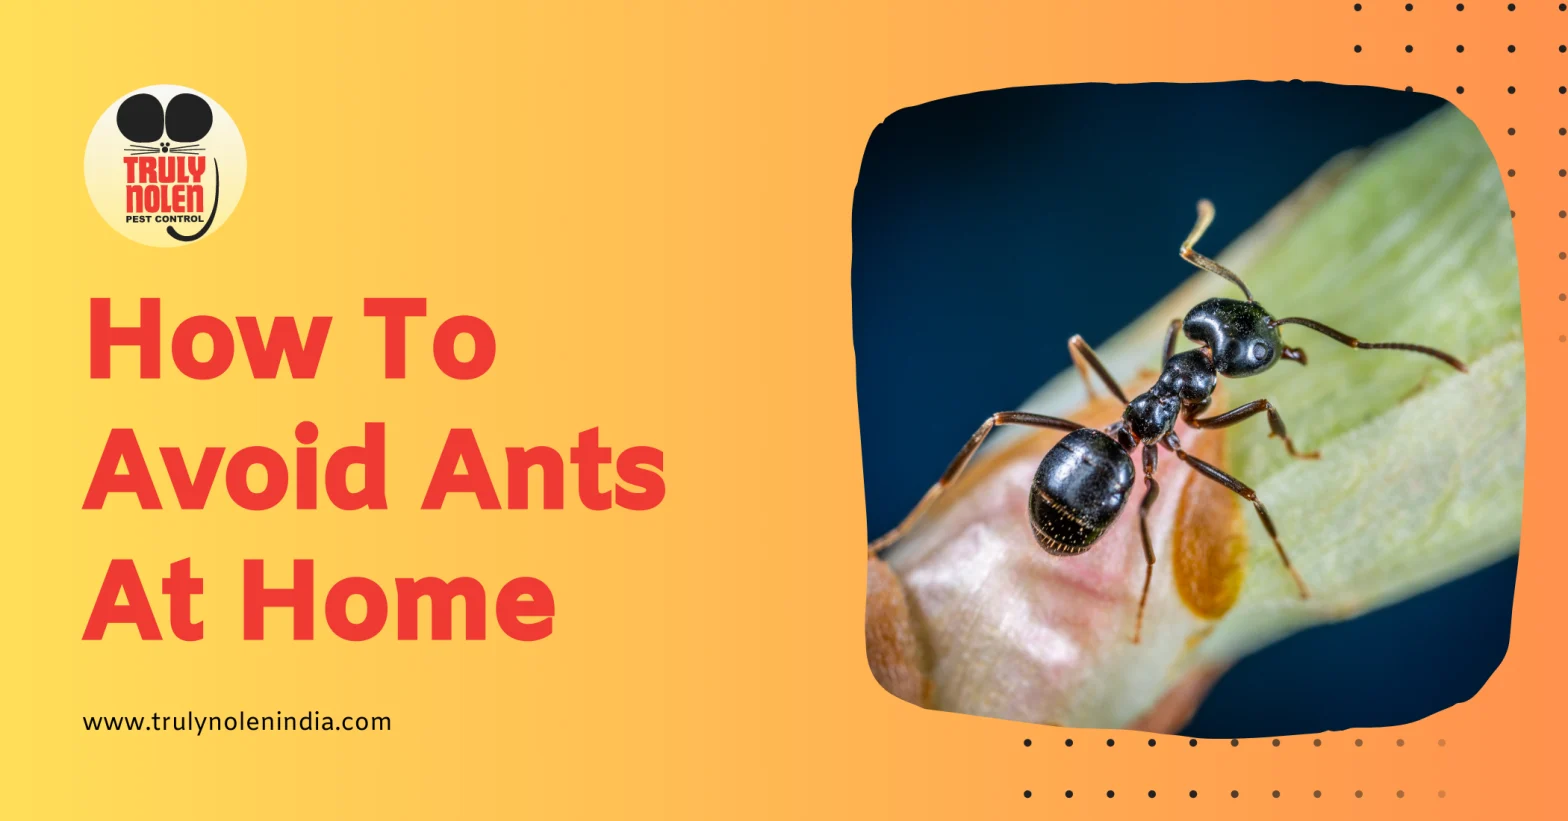 How To Avoid Ants At Home